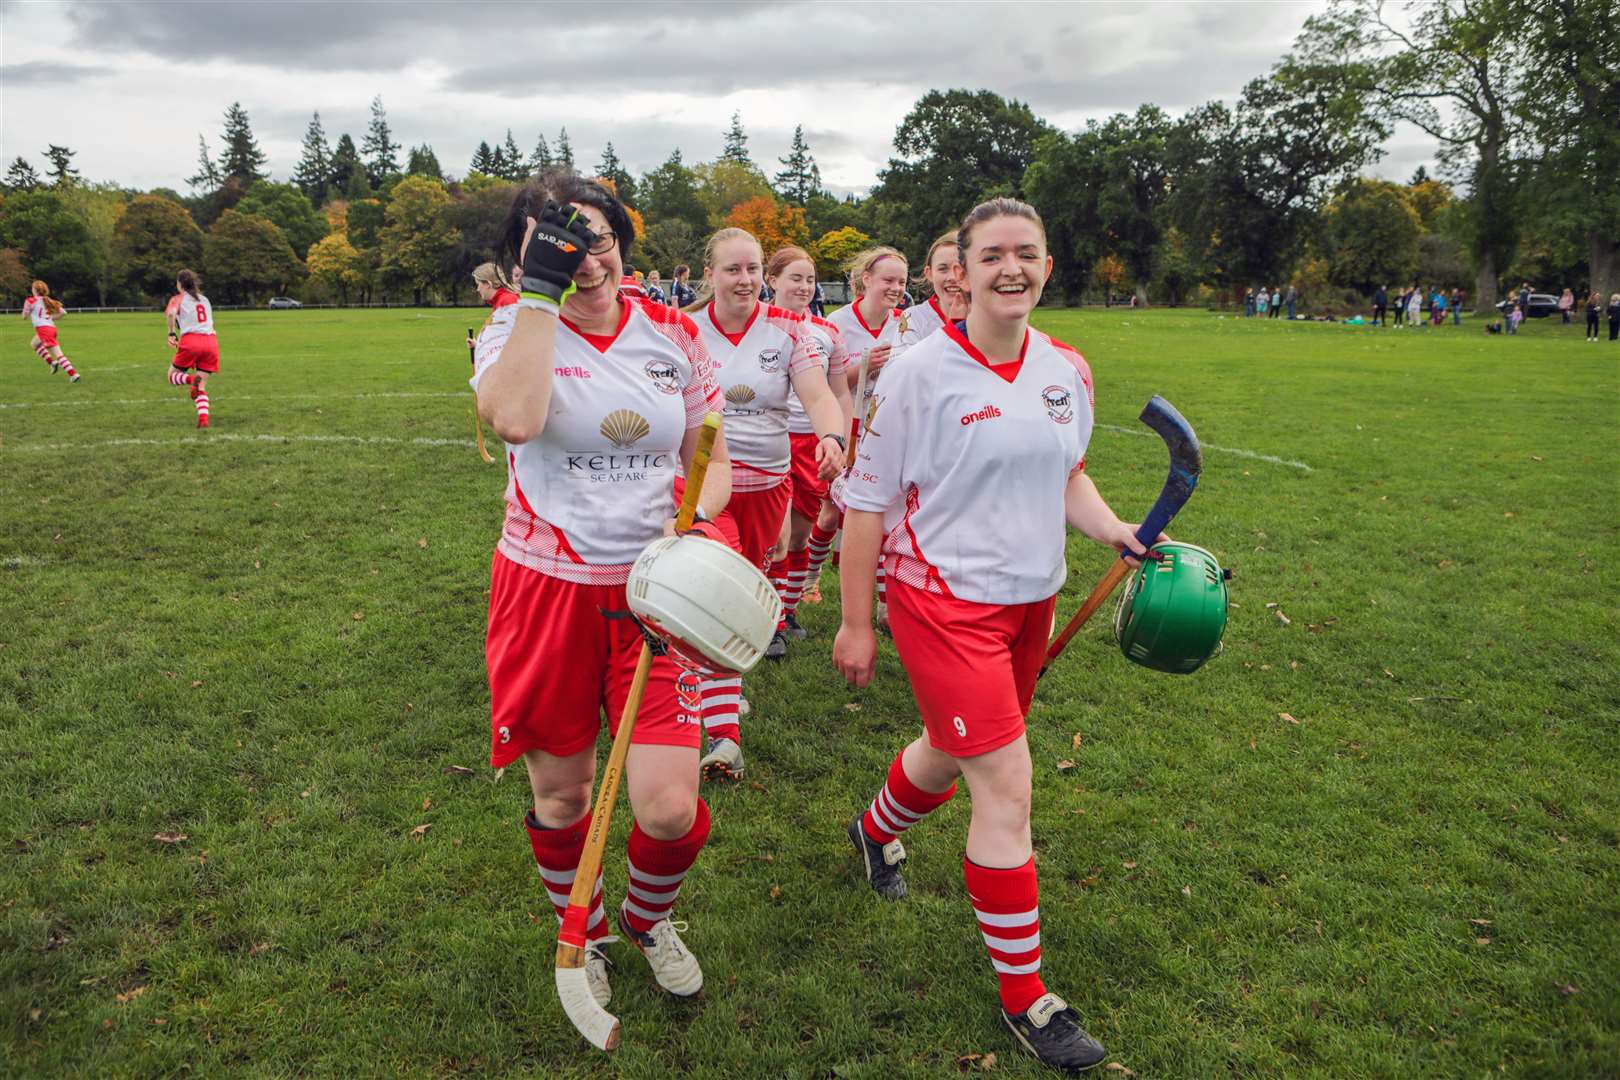 Inverness celebrate after winnning the Women's Mod Shinty Cup on penalties at Bught Park Inverness - The Royal National Mòd 2021 in Inverness, Scotland, 9/10/21